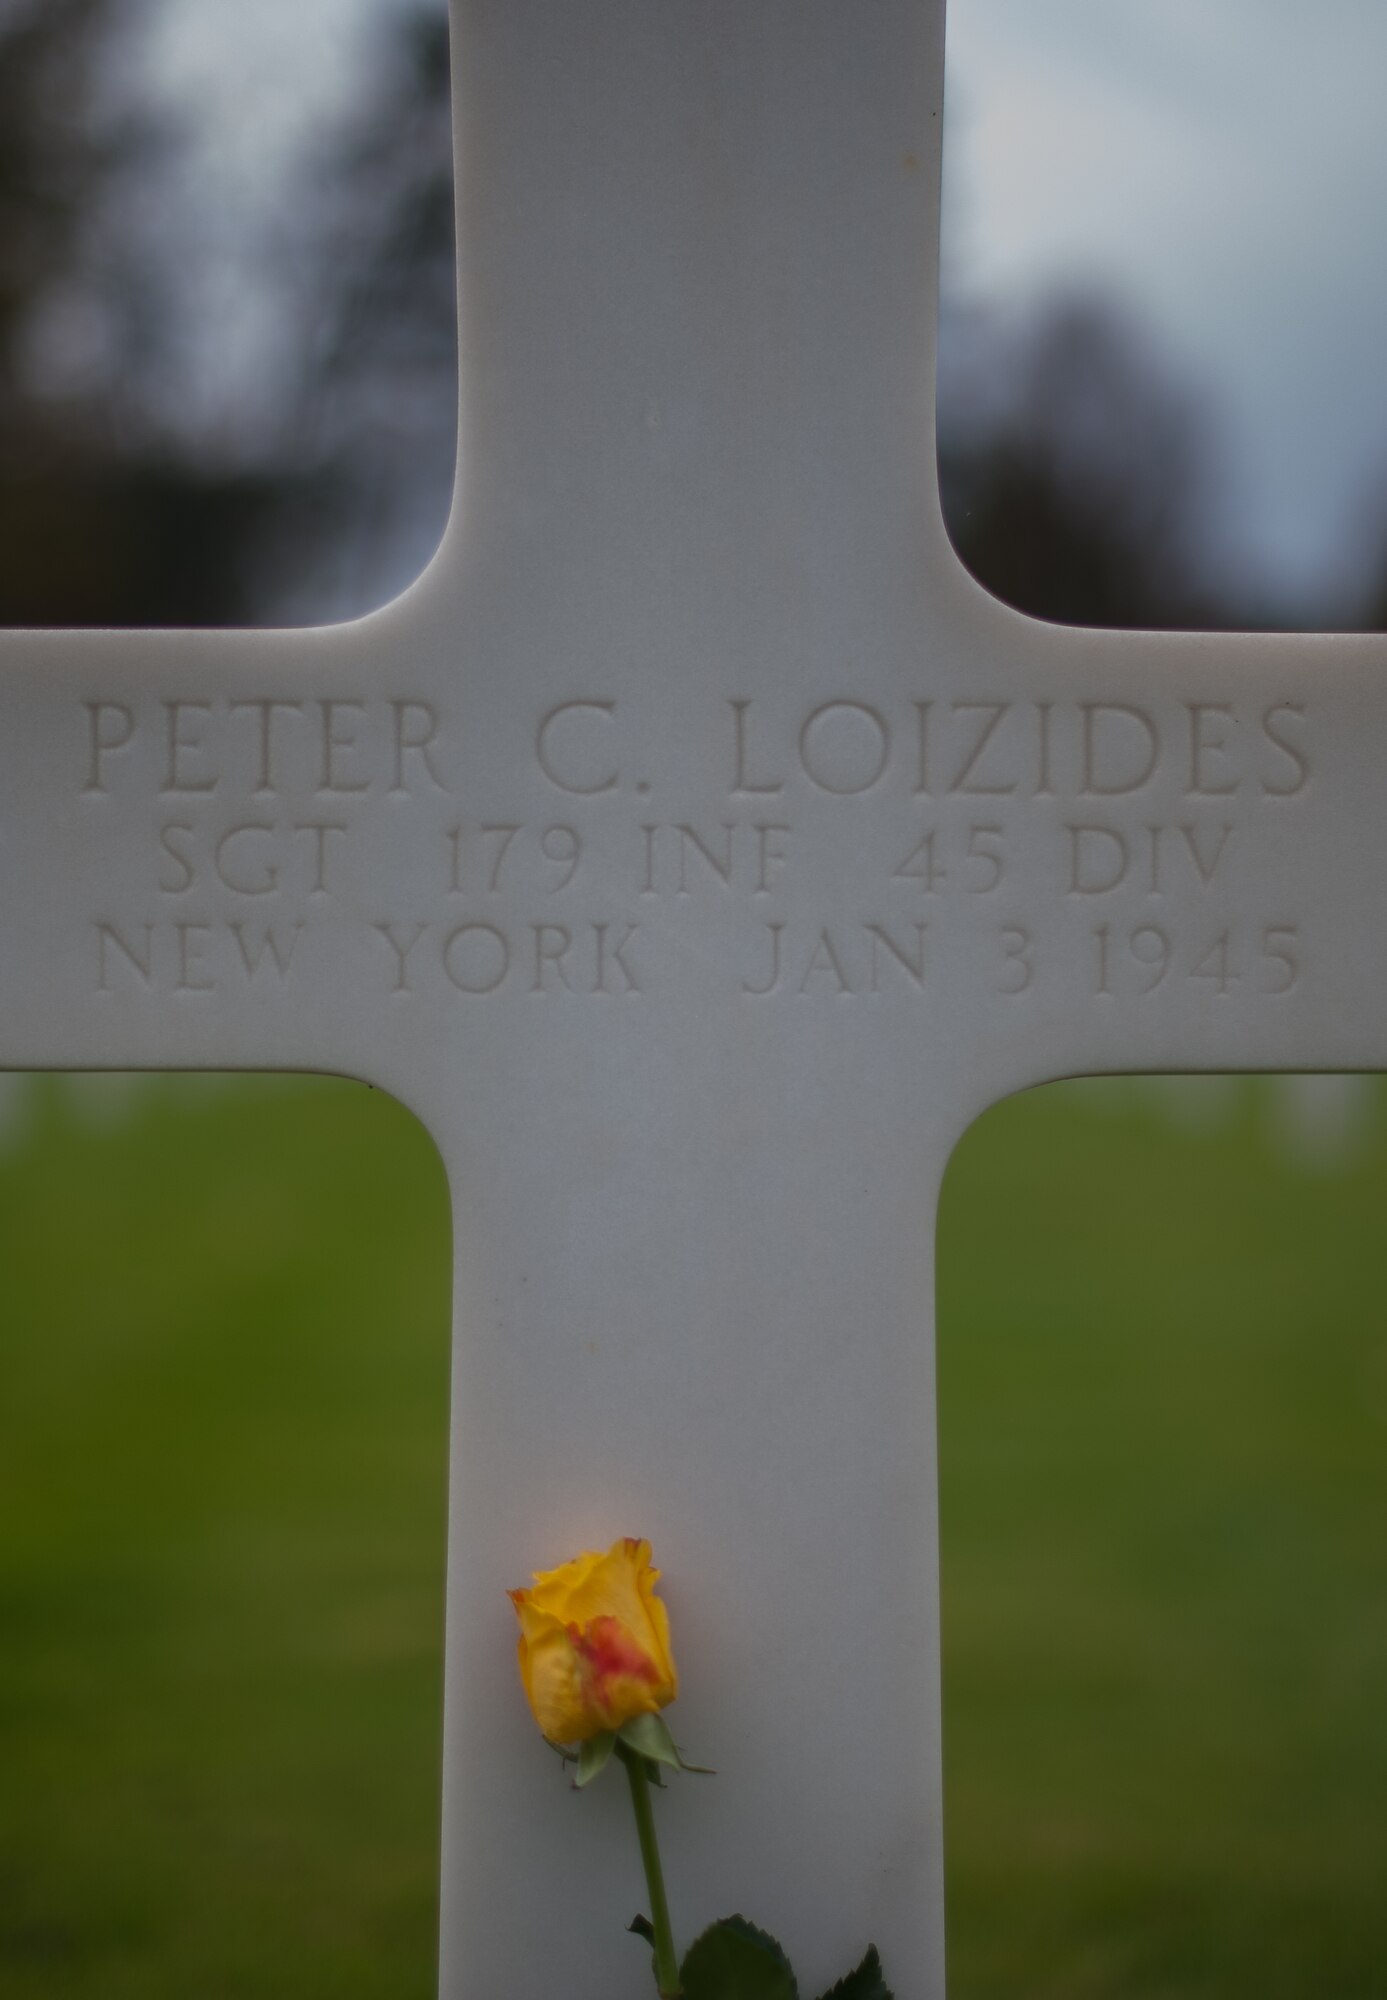 A flower lays on the gravestone of a deceased war veteran at the Lorraine American Cemetery Nov. 11, 2016, at St. Avold, France. Veterans Day is observed annually on November 11 and commemorates military veterans who currently serve or have served the U.S. armed forces, including those who gave the ultimate sacrifice. According to the DoD and Veterans Administration, since World War I, approximately 624,000 U.S. servicemembers have been killed in action battling in wars and conflicts. The Lorraine American Cemetery contains the buried remains of over 10,000 of them. It is the largest burial site of U.S. servicemembers in Europe. (U.S. Air Force photo by Airman 1st Class Lane T. Plummer)